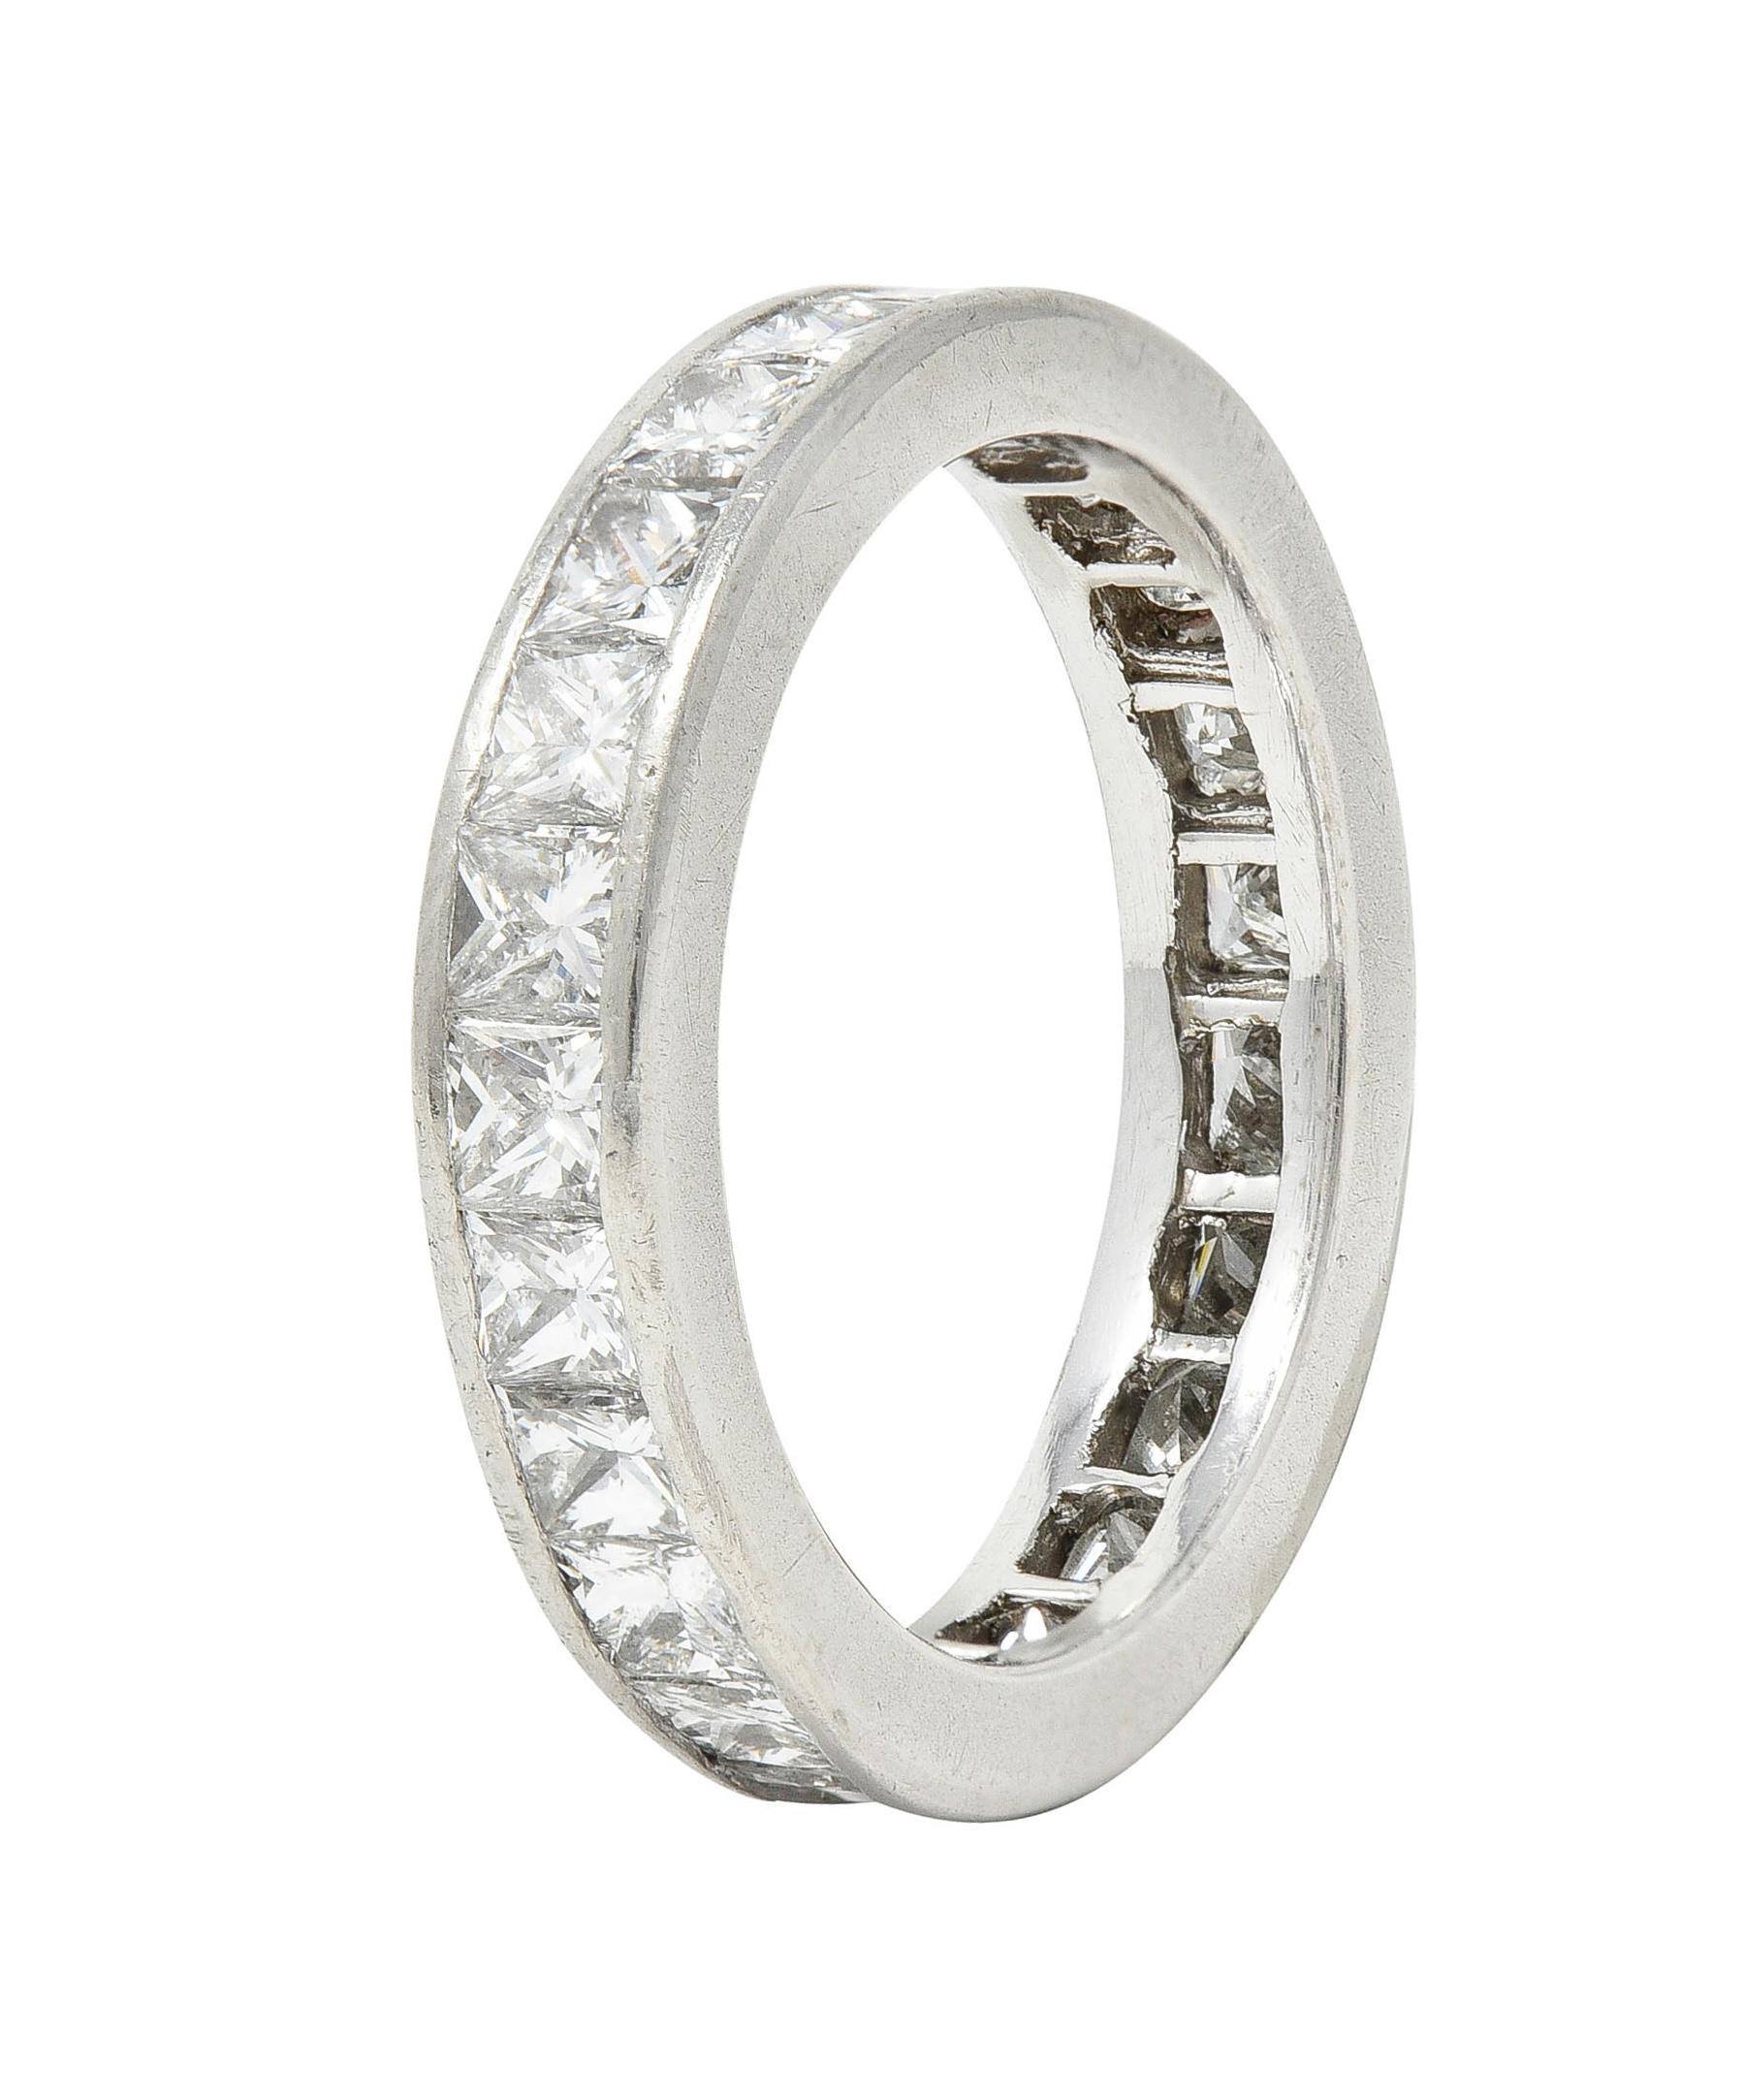 Band ring features princess cut diamonds channel set fully around
Weighing approximately 2.30 carat total - G/H in color with VS clarity
With high polished finish
Tested as platinum
Circa: 2000s
Ring size: 6 1/4 and not sizable
Measures north to